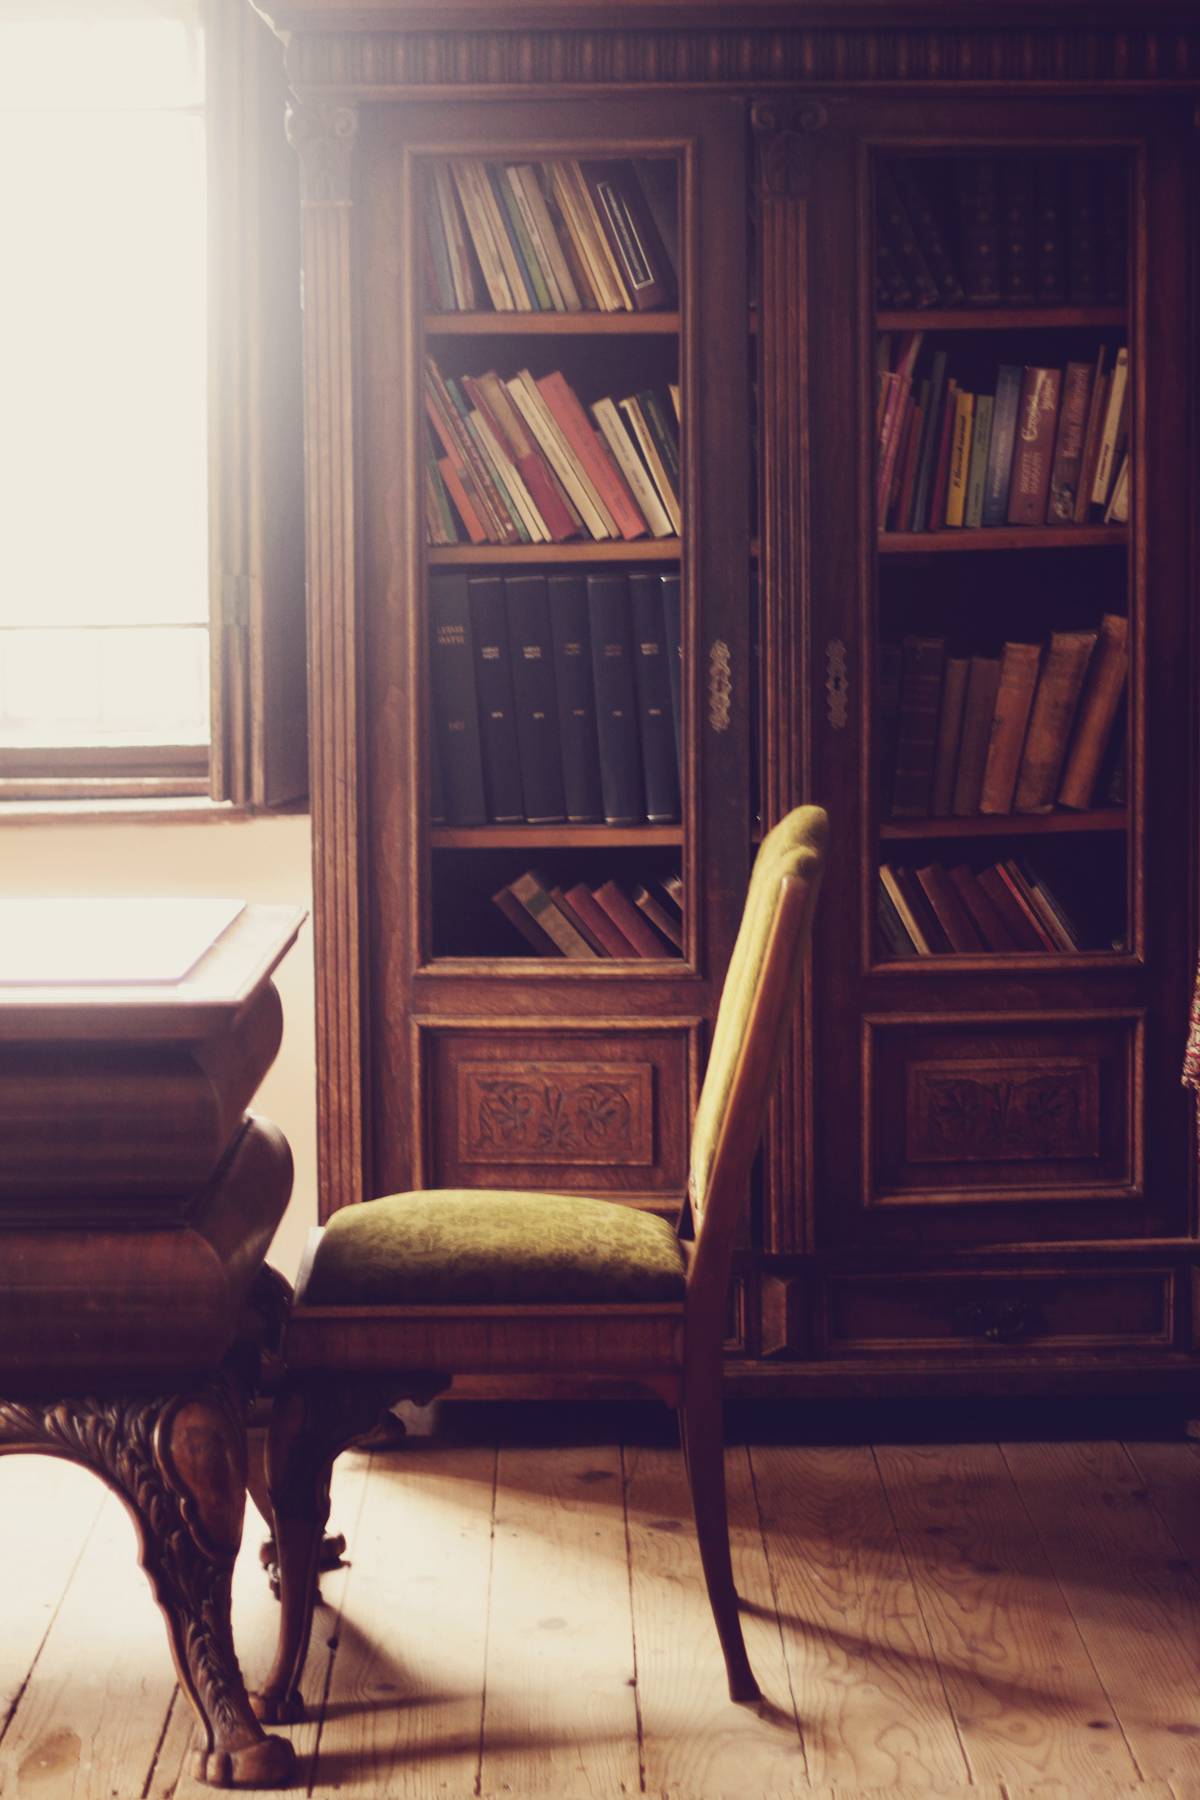 study room, old mansion, old books, library